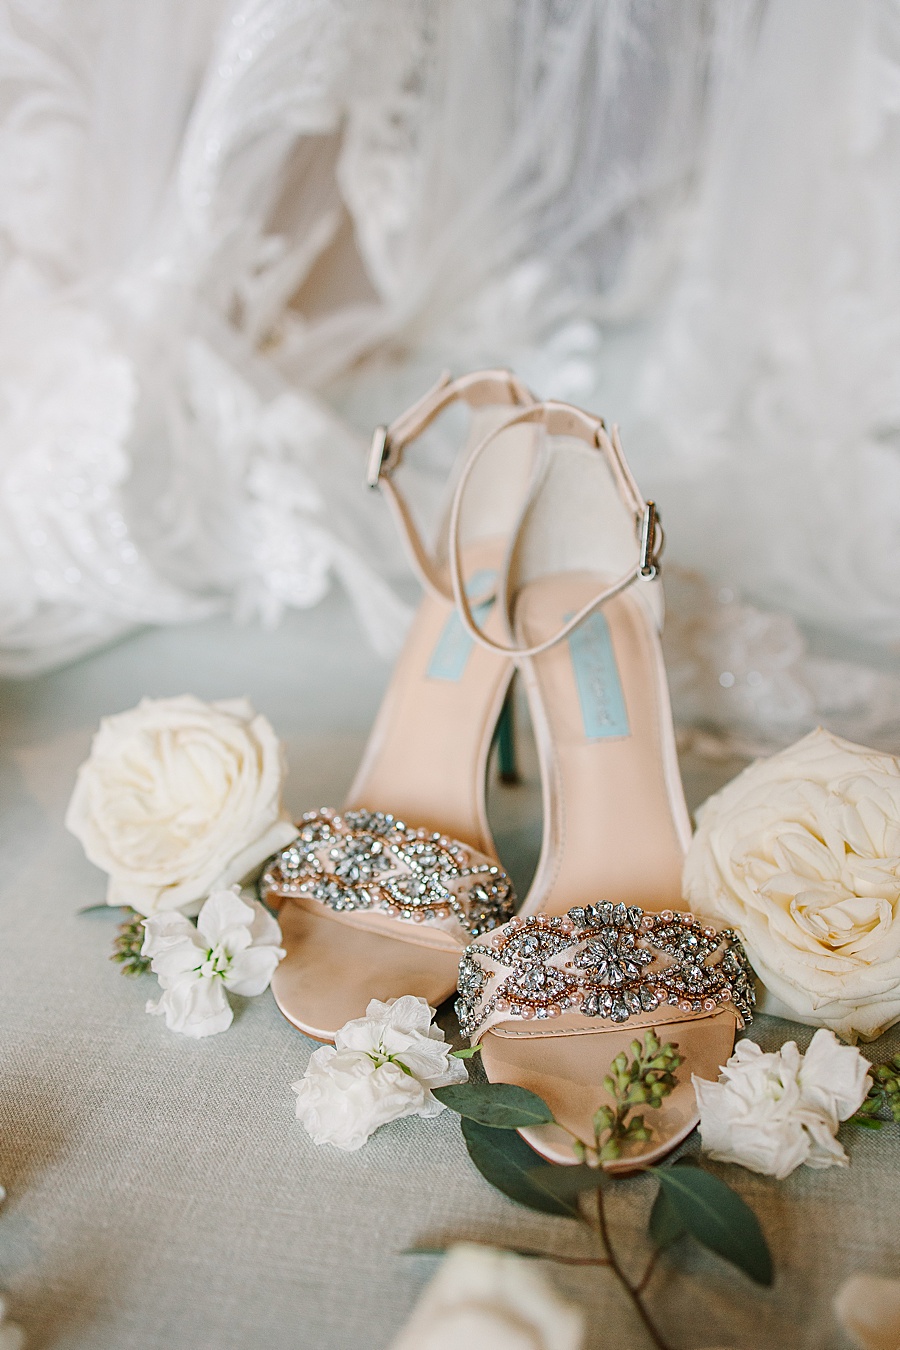 Beaded wedding shoes with white roses, Jackson Terminal in Knoxville TN by Mandy Hart Photo, Knoxville TN Wedding Photographer